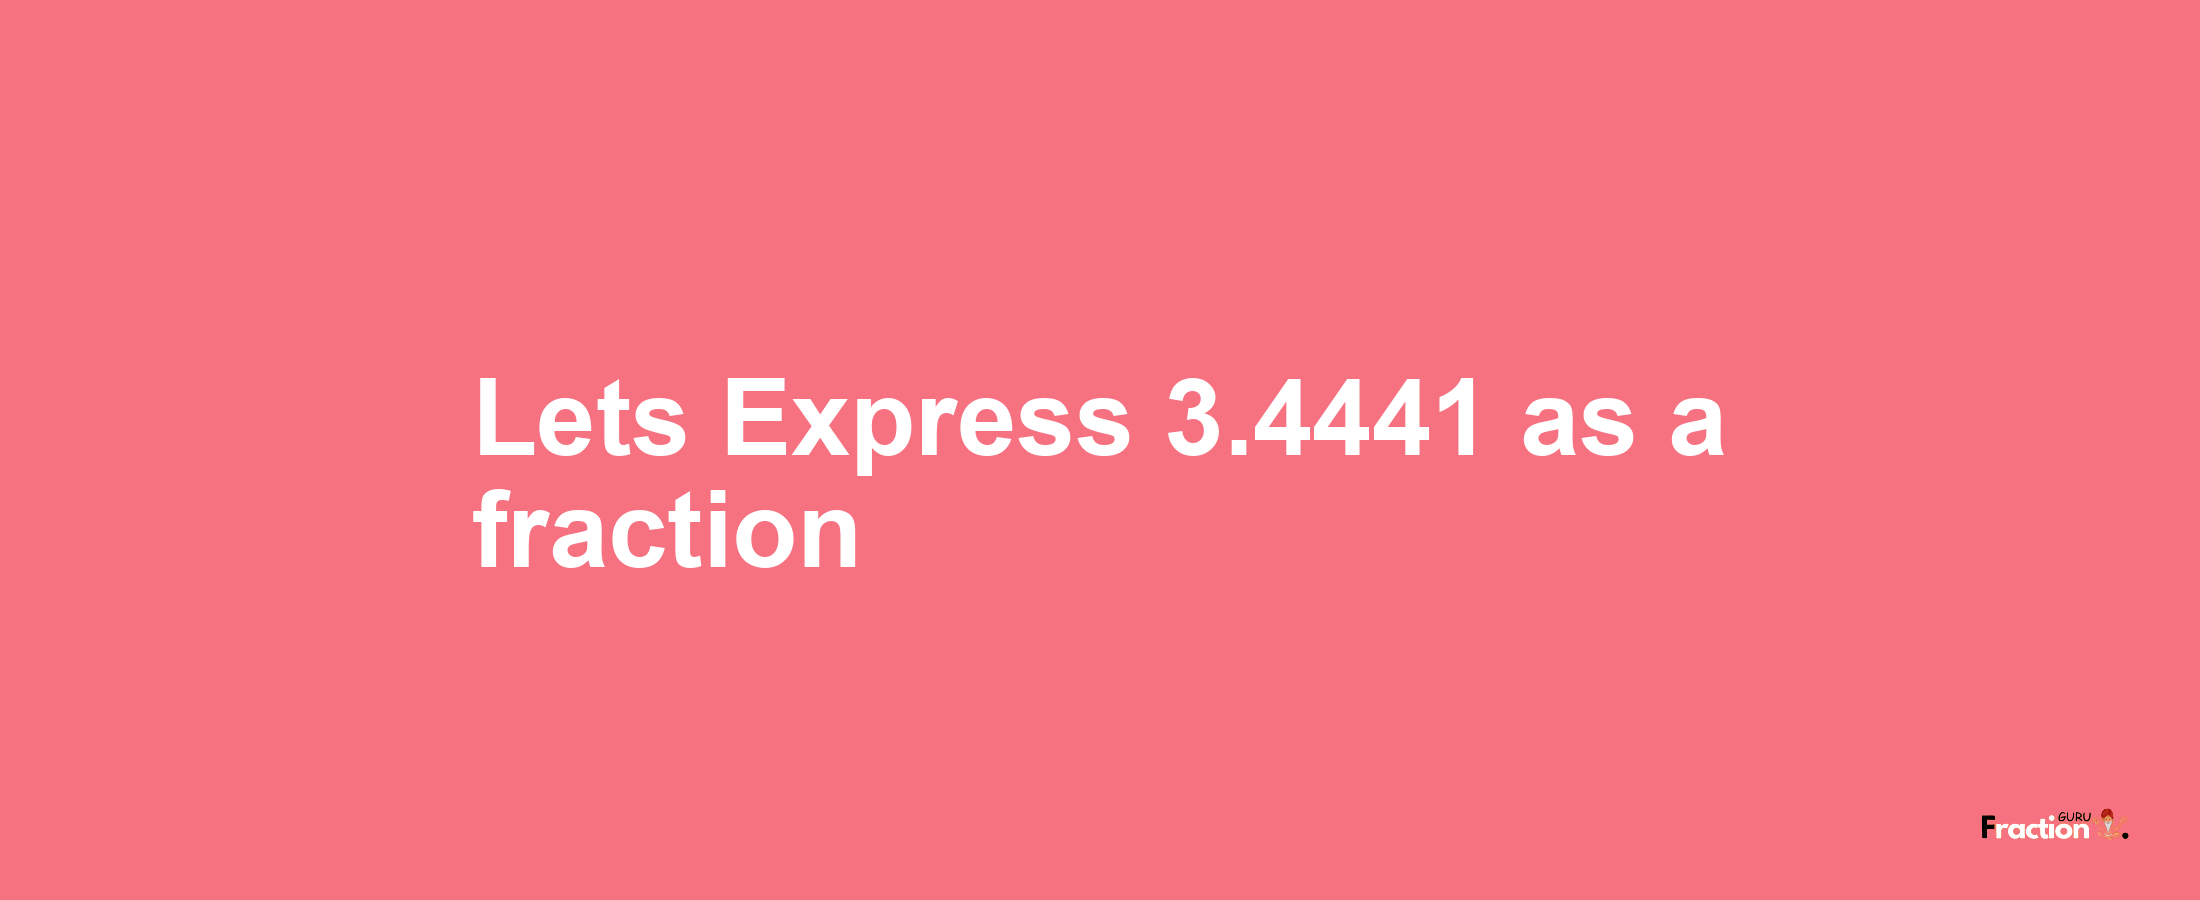 Lets Express 3.4441 as afraction